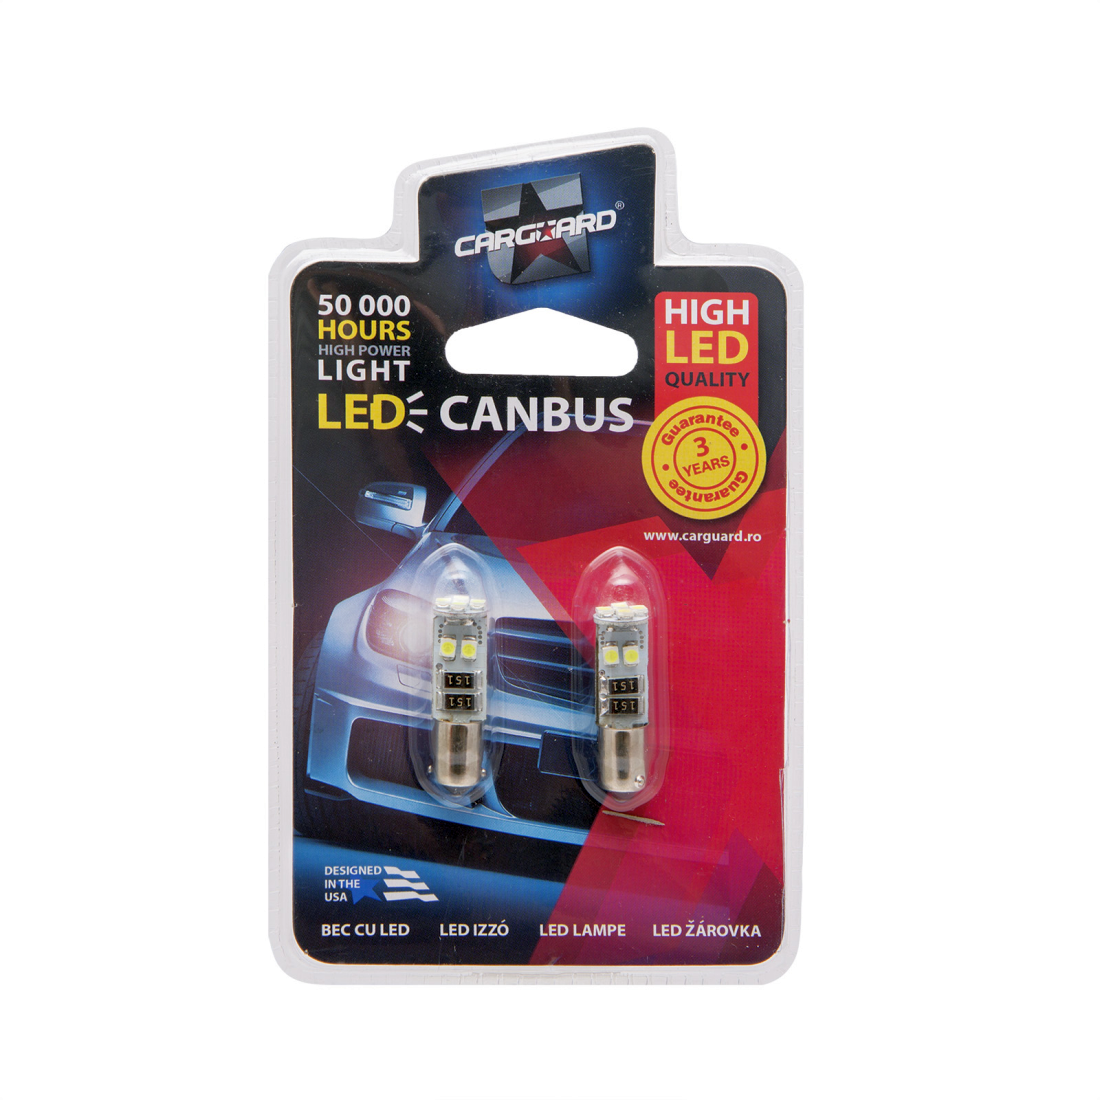 Led pozitie can-bus 101 Carguard